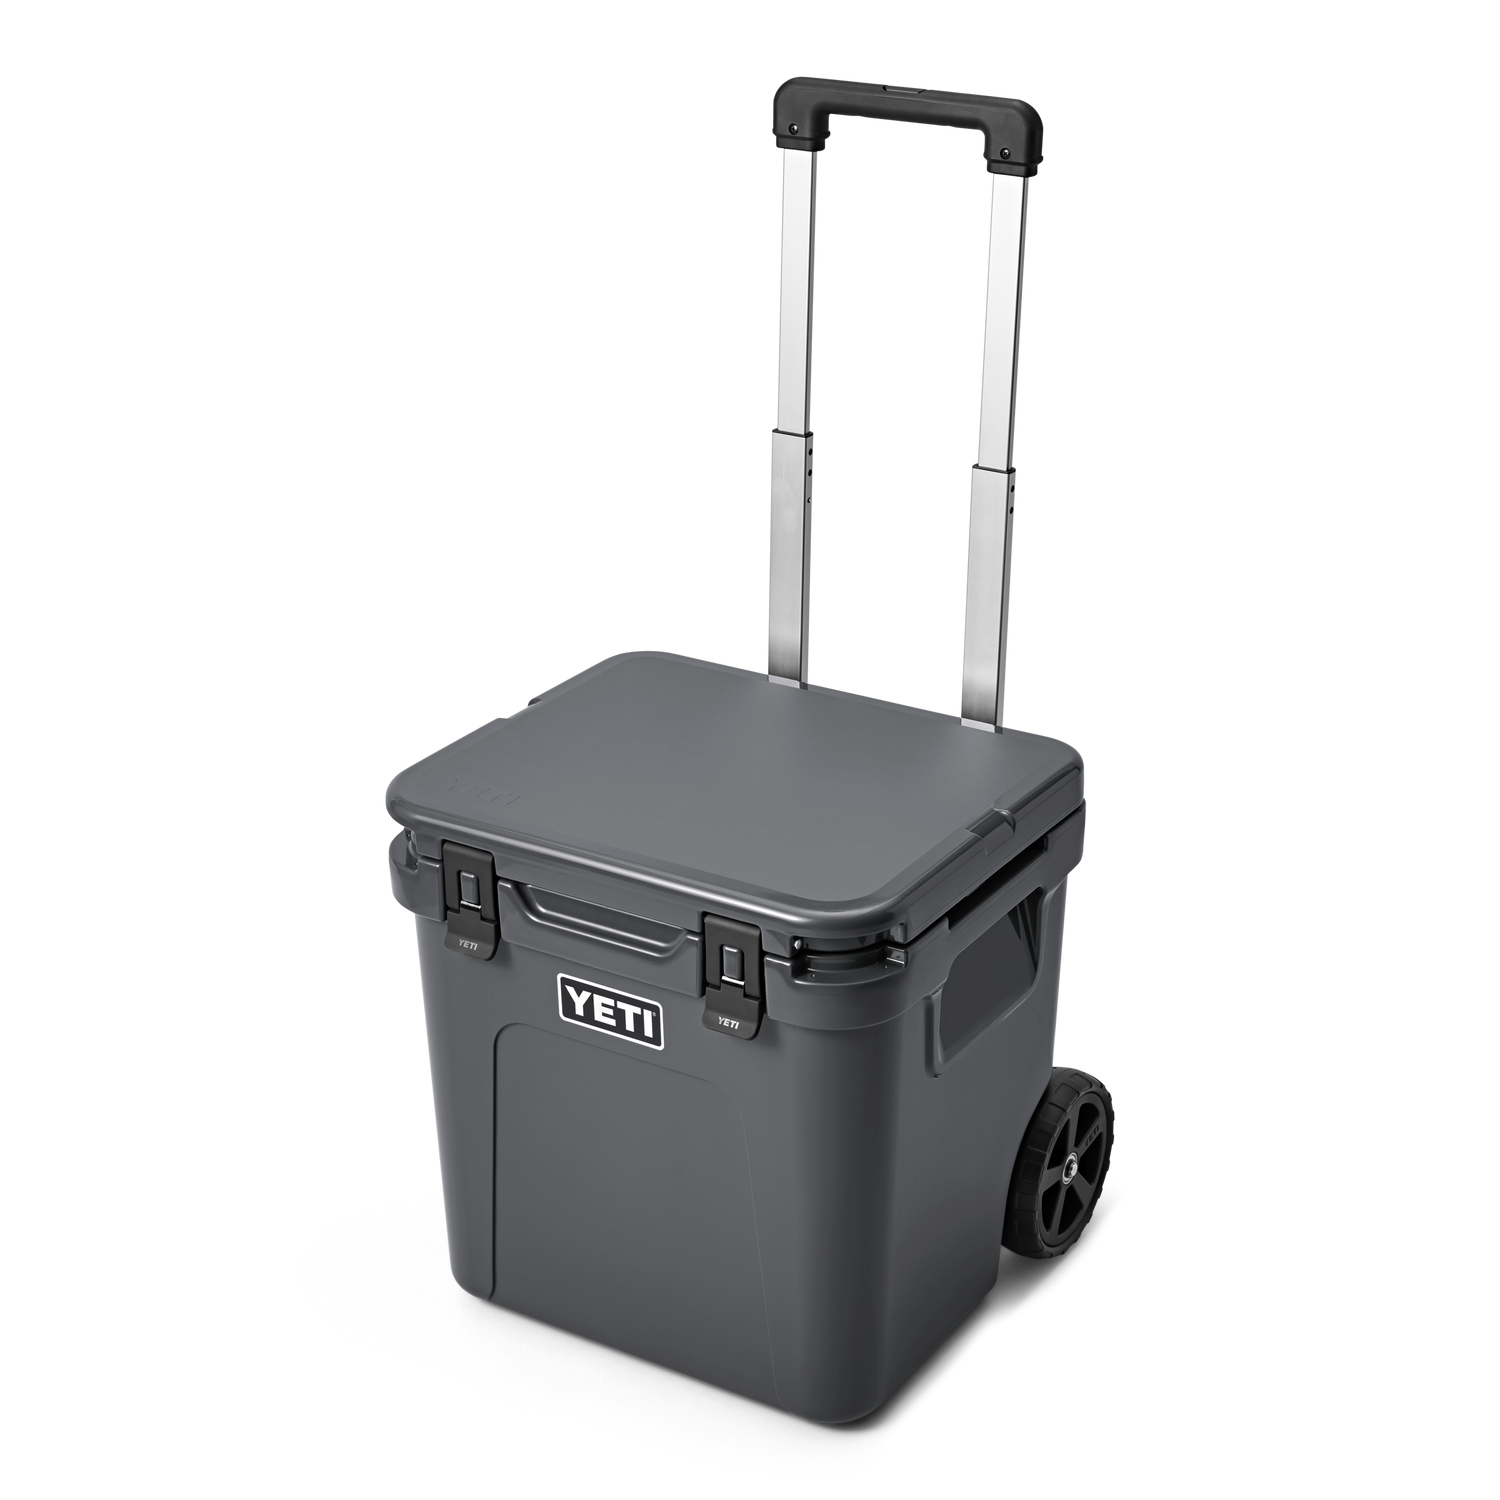 YETI Cool Boxes, Ice Chests, And Coolers – YETI EUROPE